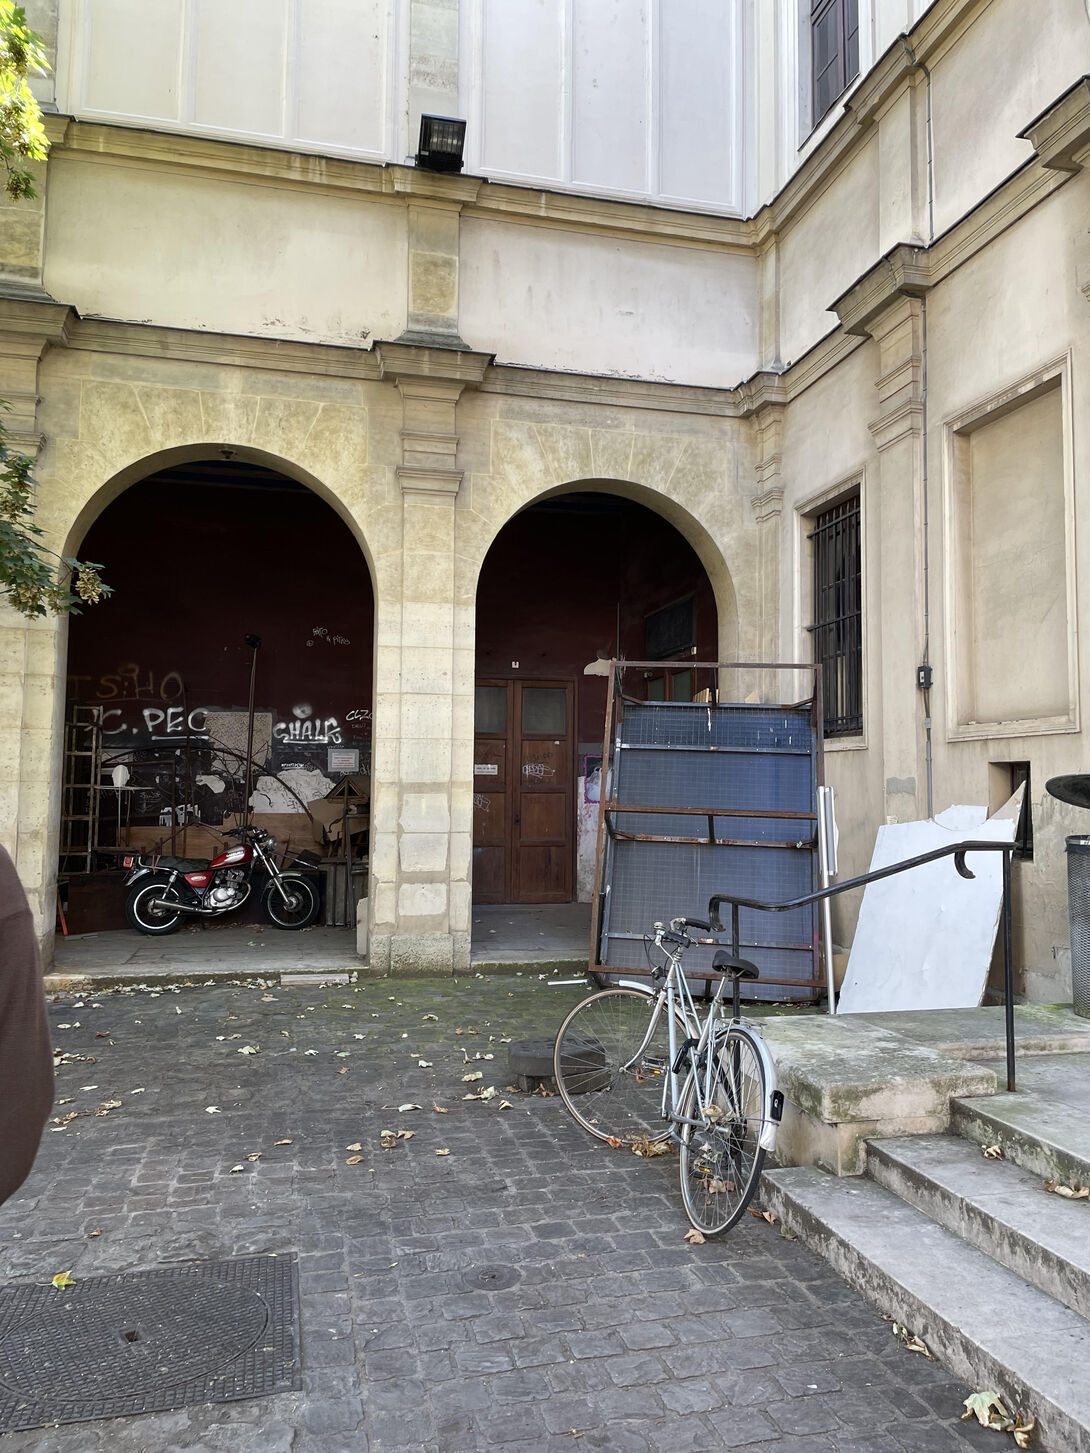 A Parisian courtyard with a bicycle leaning against the railing.